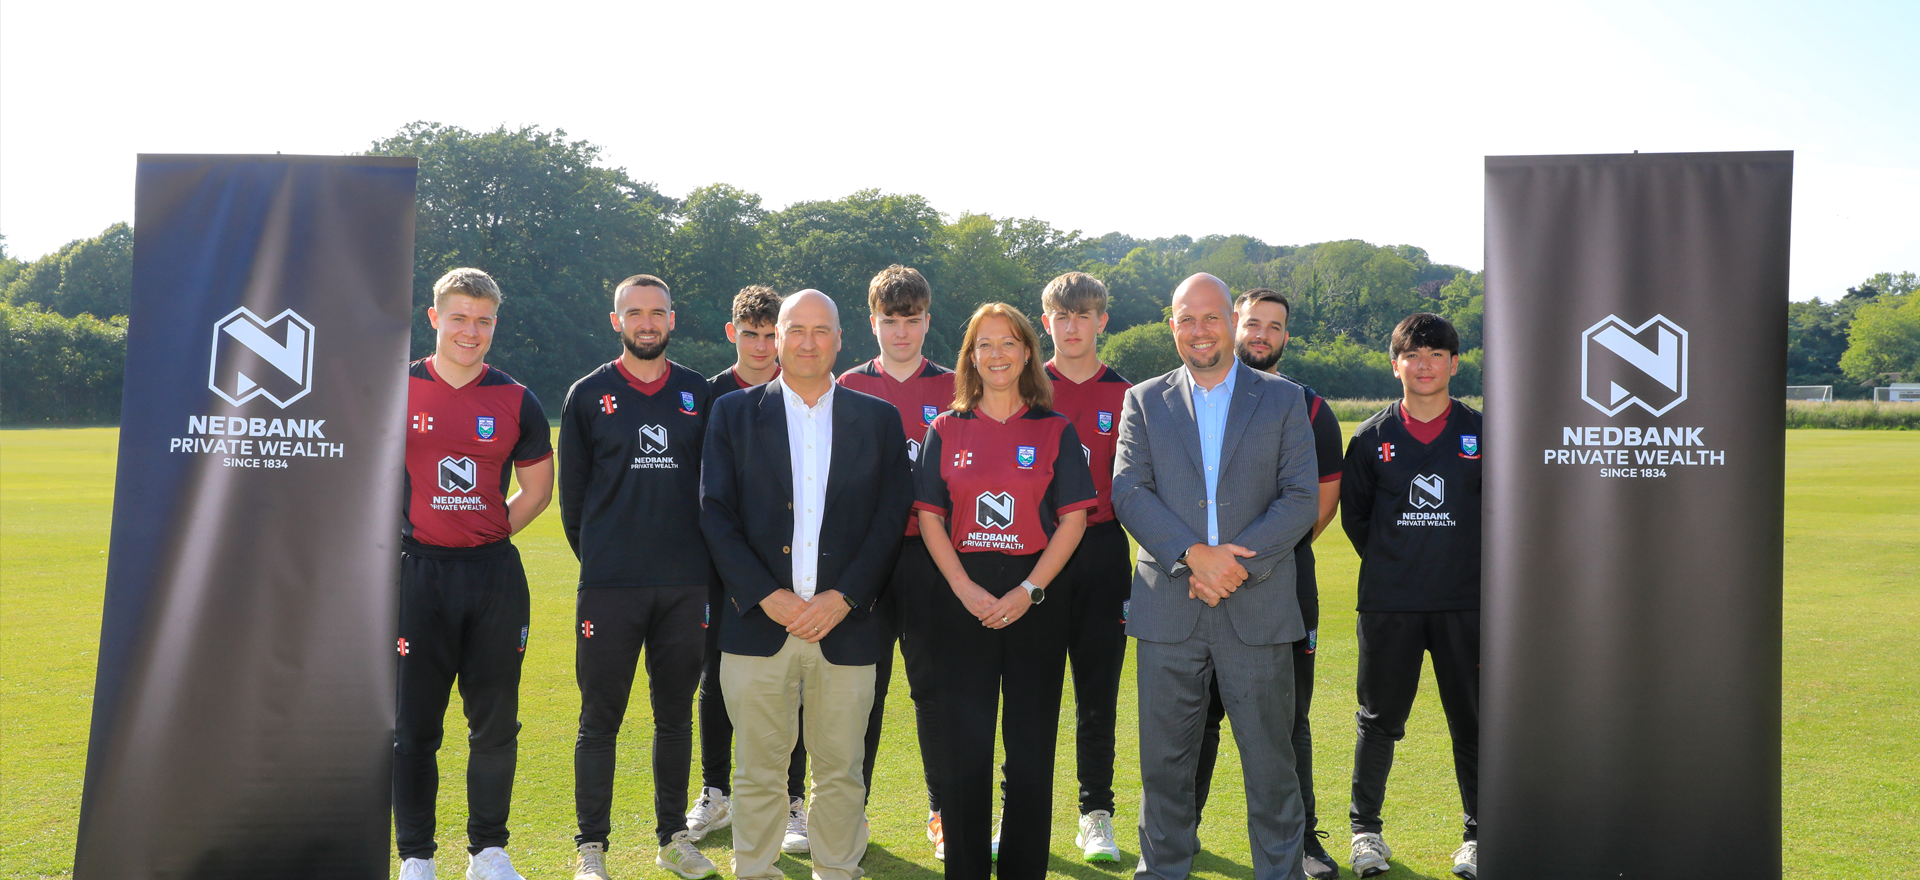 Nedbank Private Wealth partners with Cronkbourne Cricket Club  in new sponsorship deal